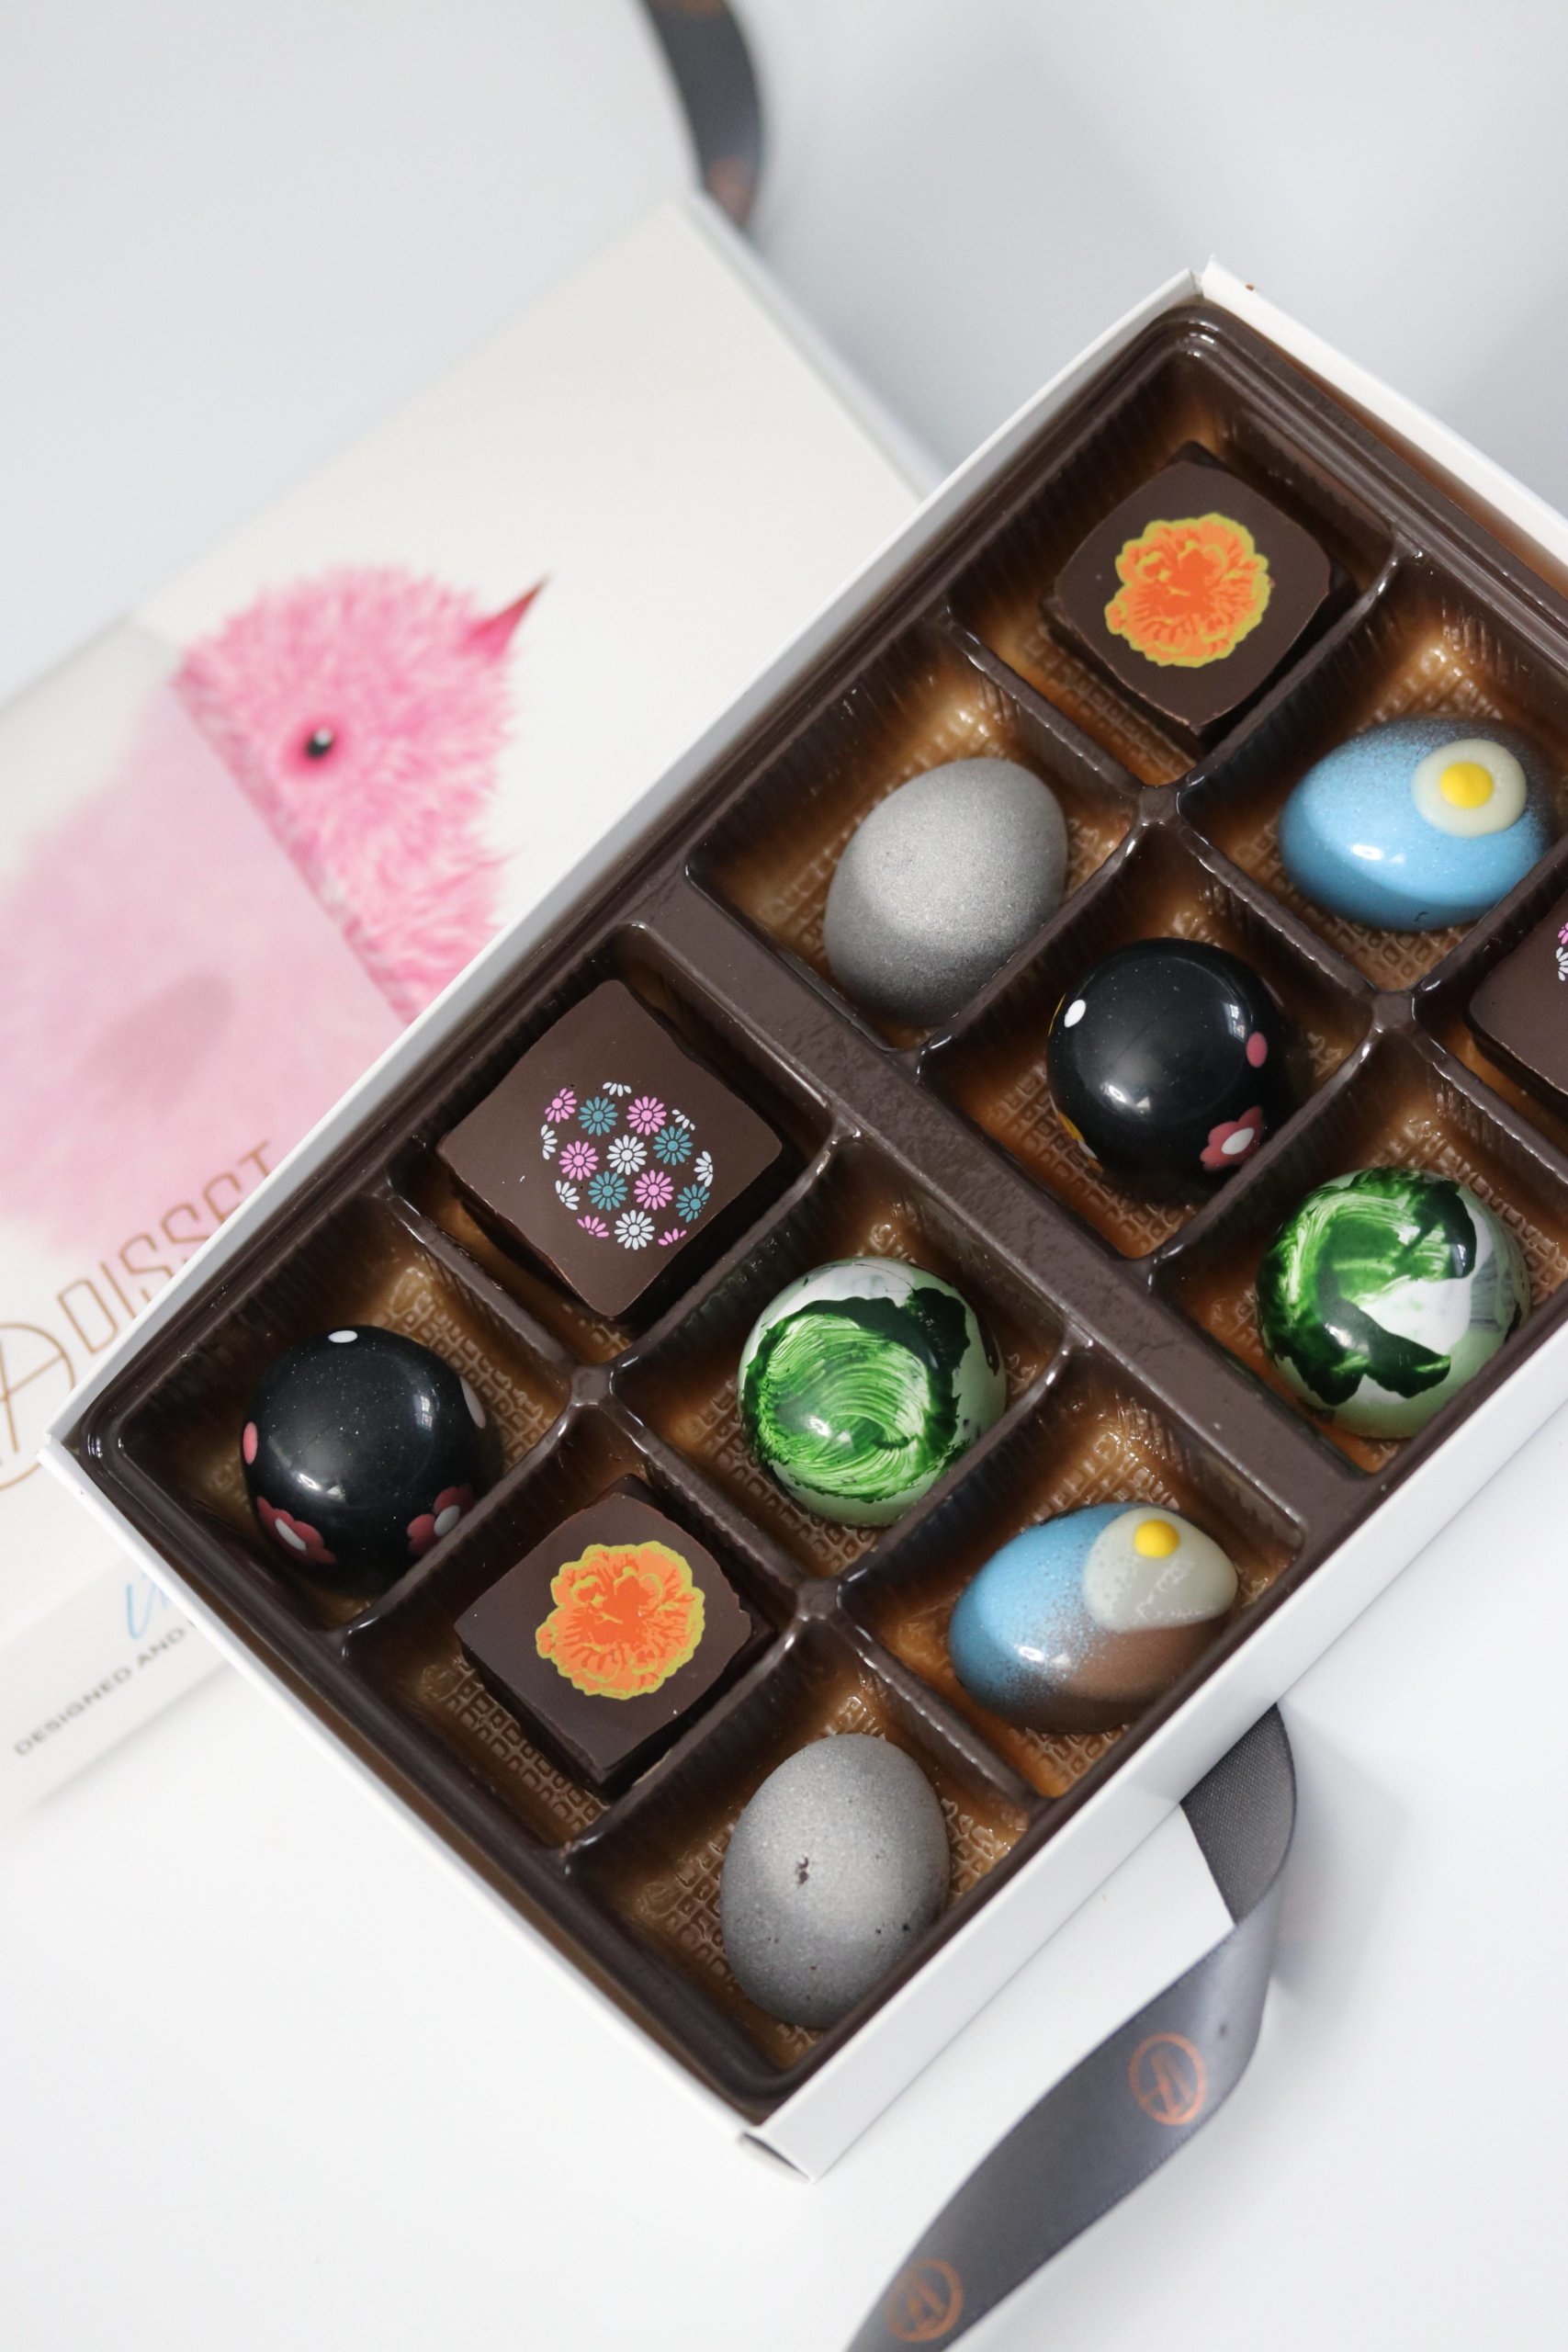 Disset Chocolate's Easter 2021 box